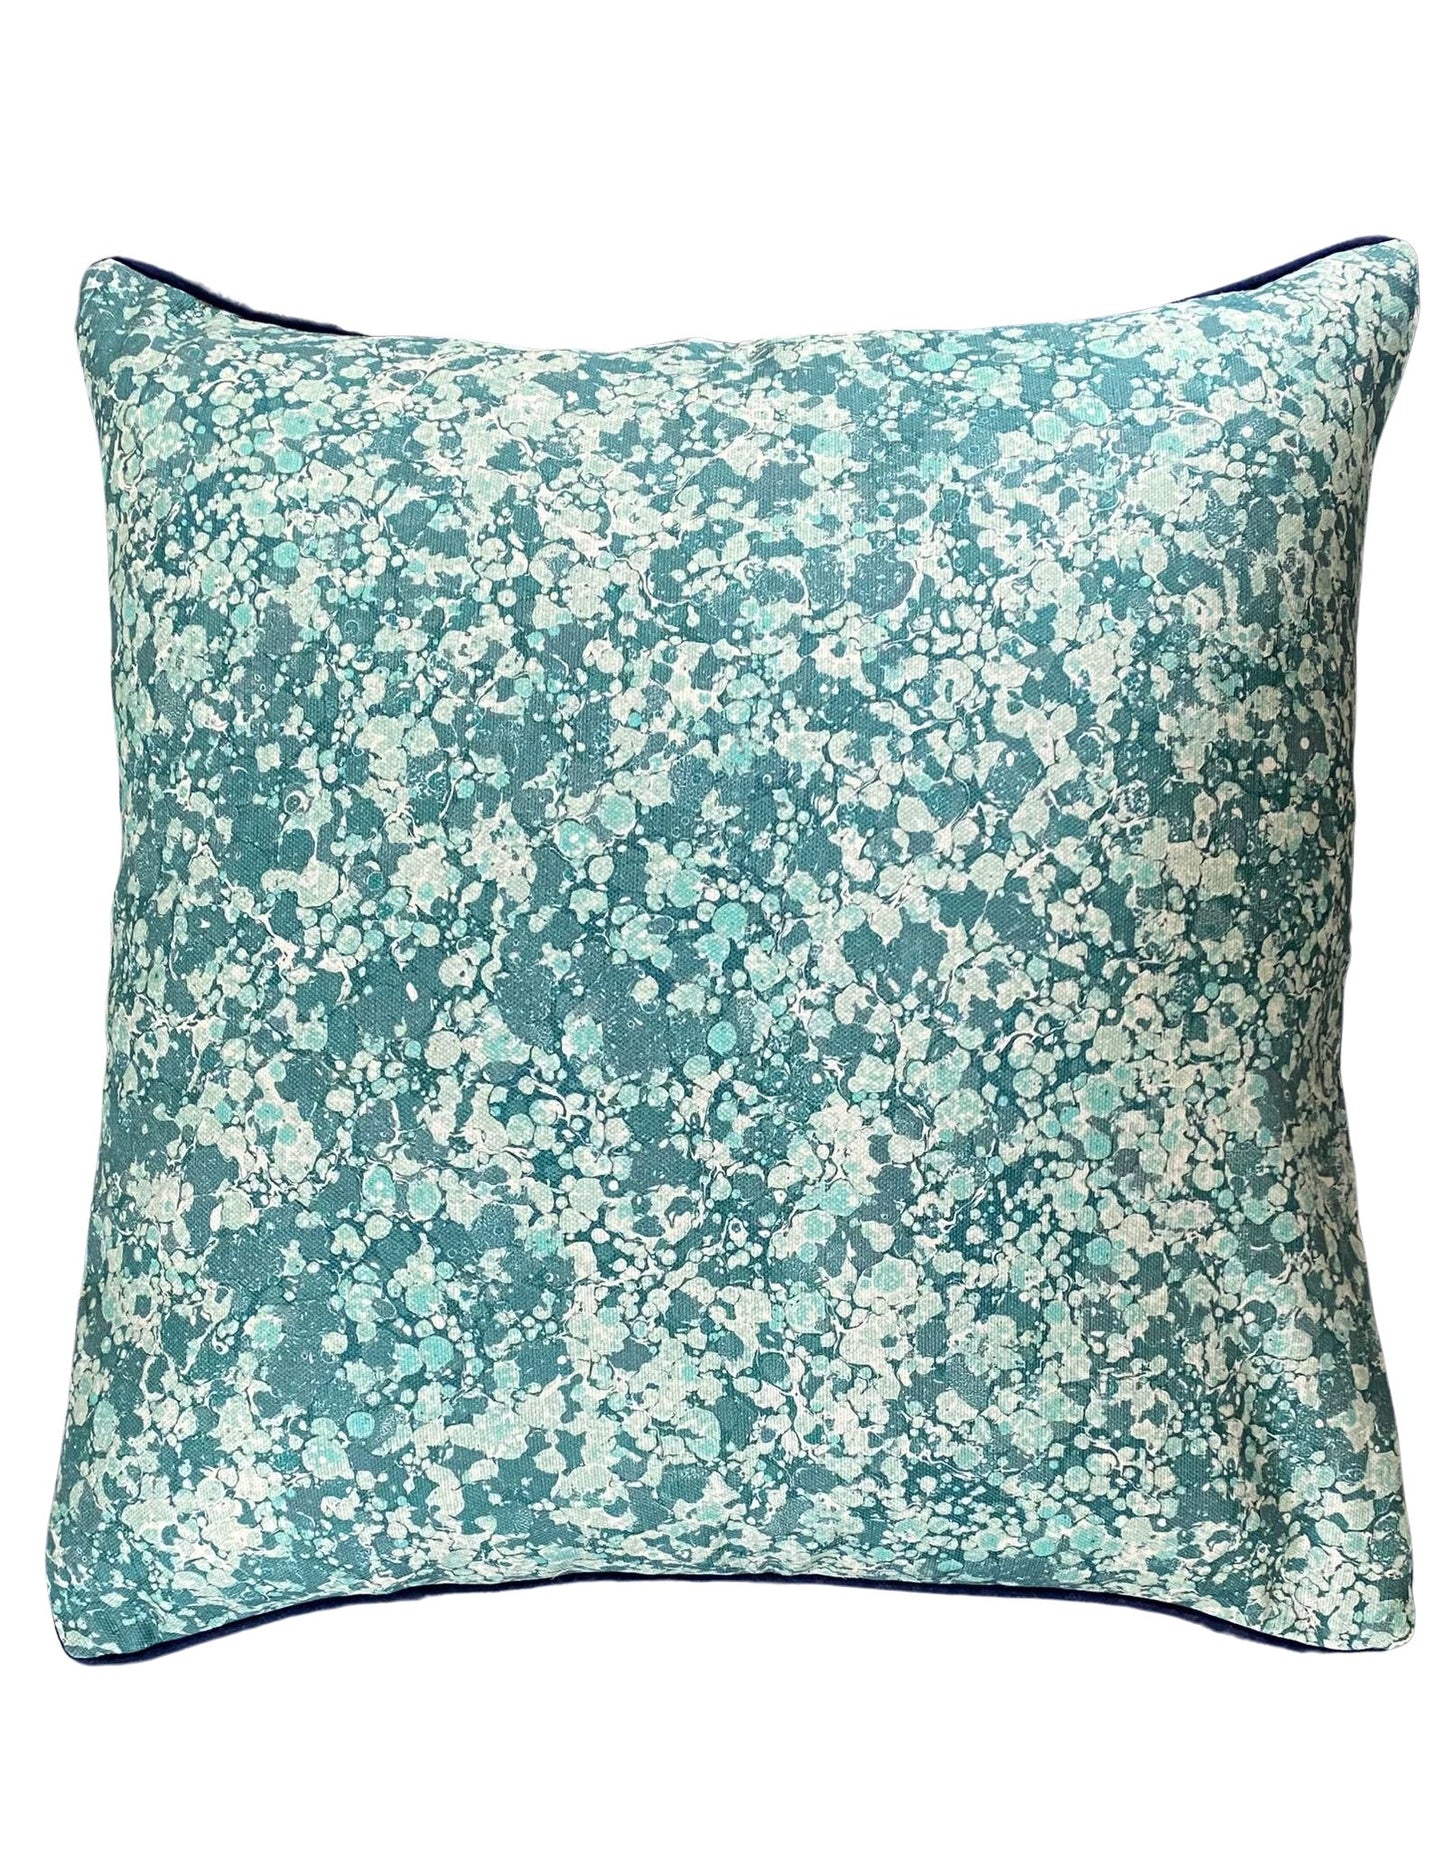 House of Amitié Linen Cushion - Juniper Blue Anise & Ditzy Aloma - House of Amitiéproduct_type#CUS - PAD - 002